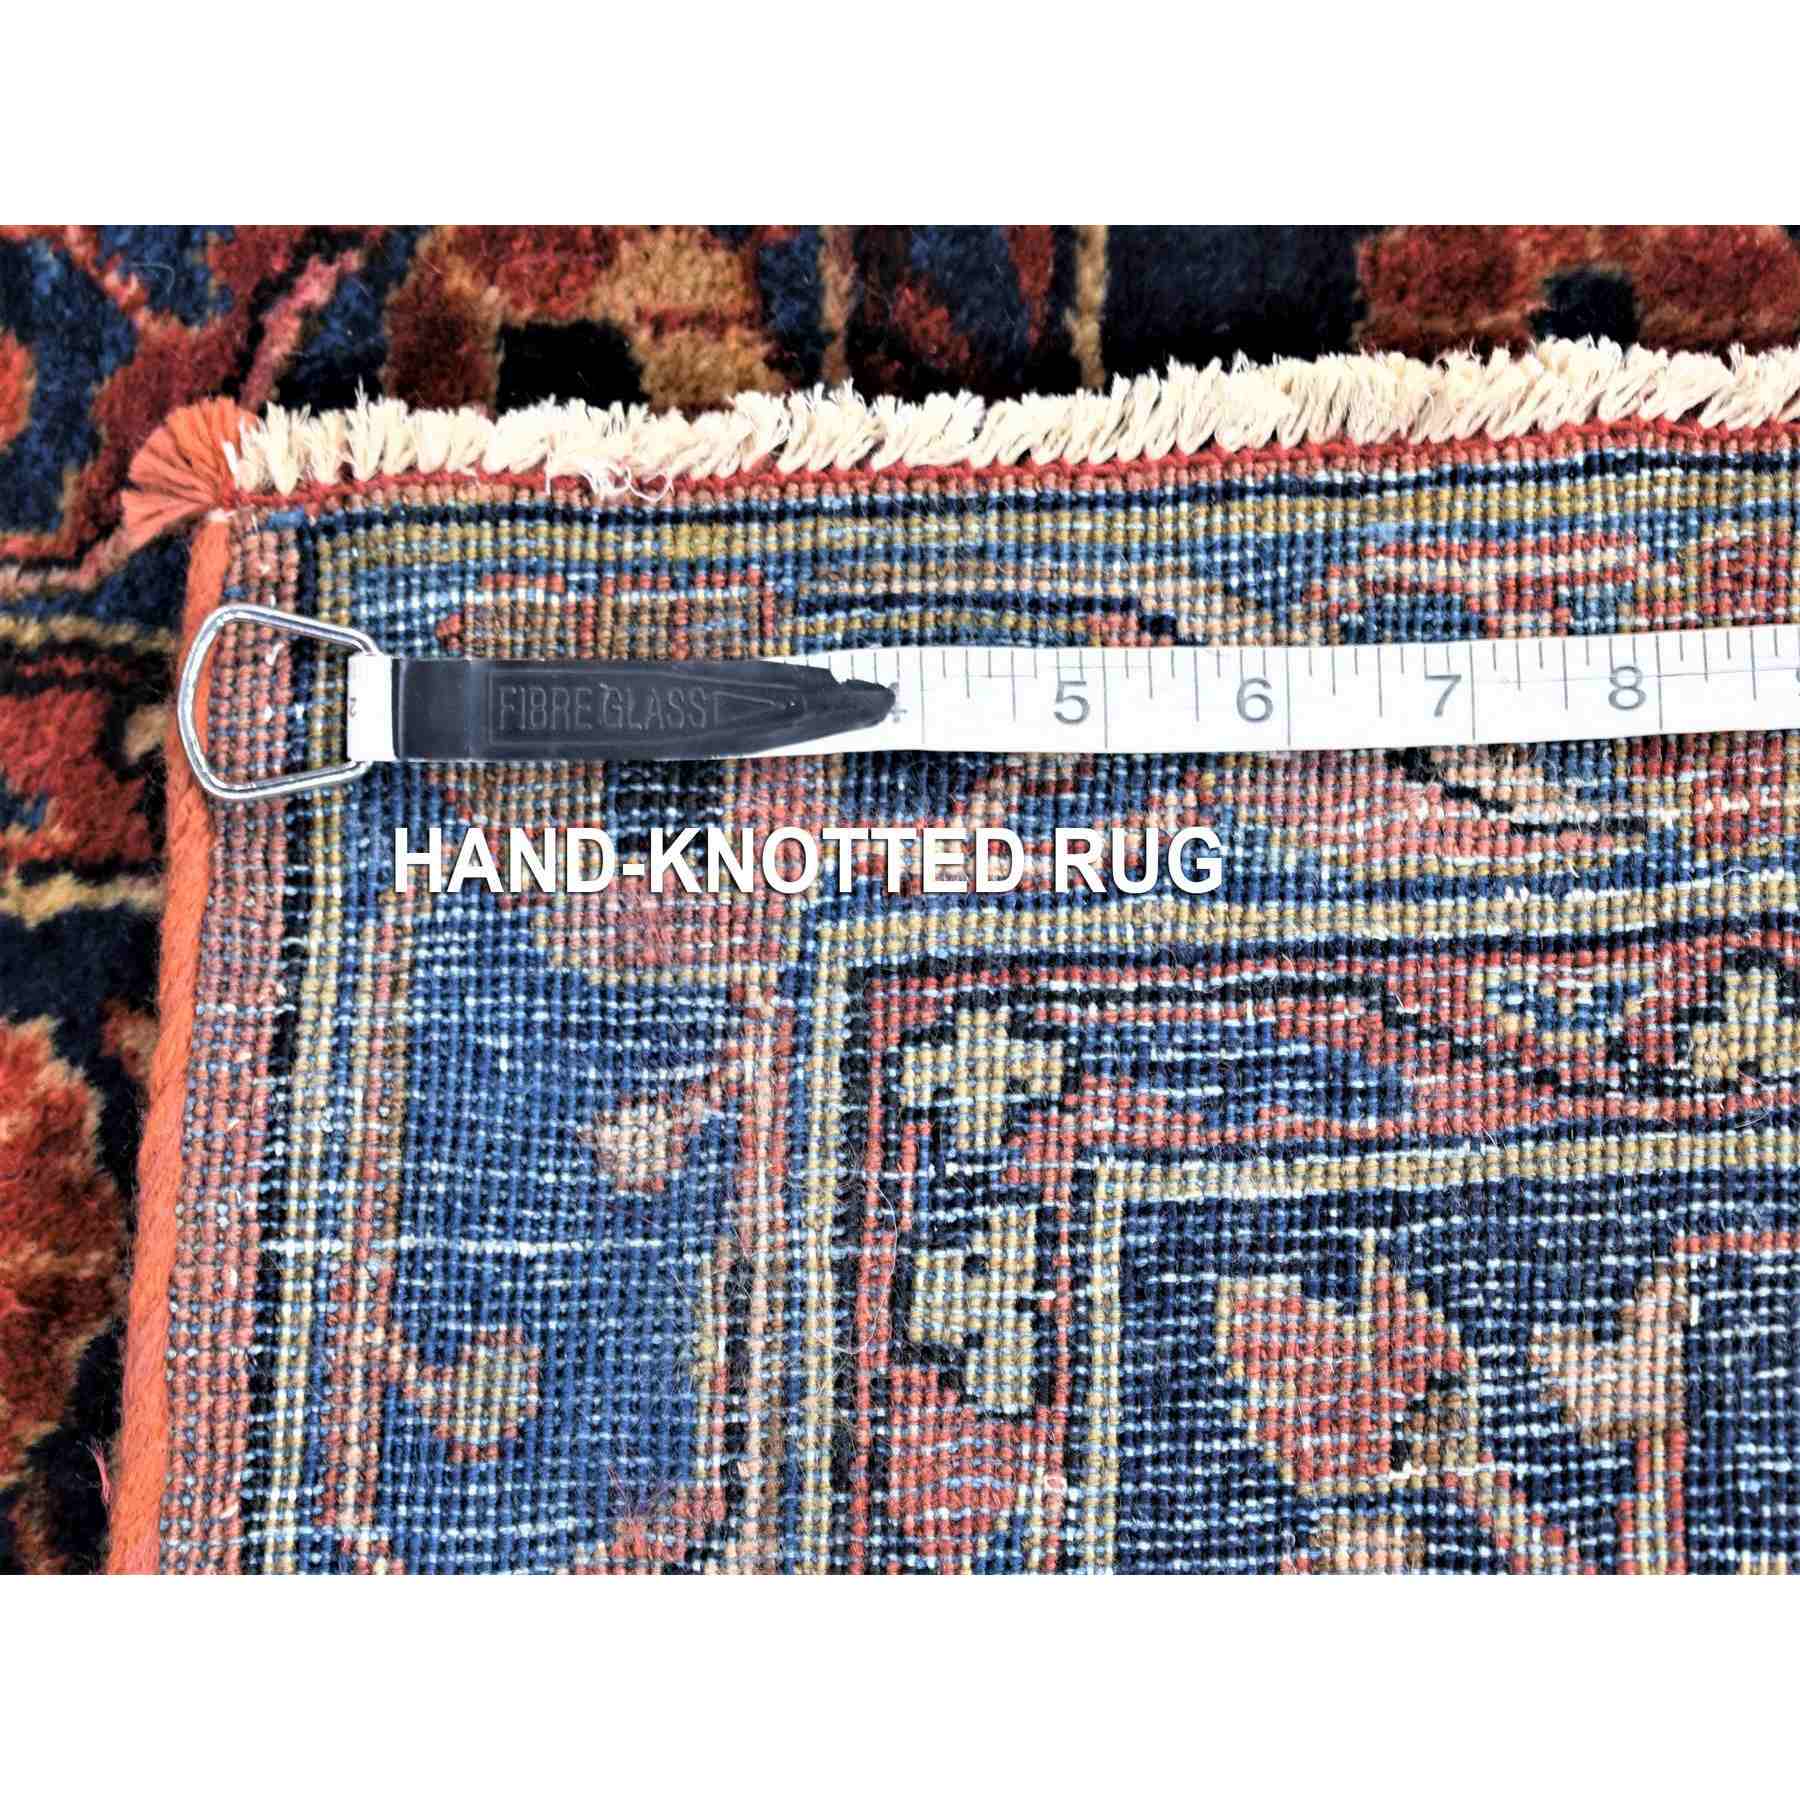 Antique-Hand-Knotted-Rug-401090